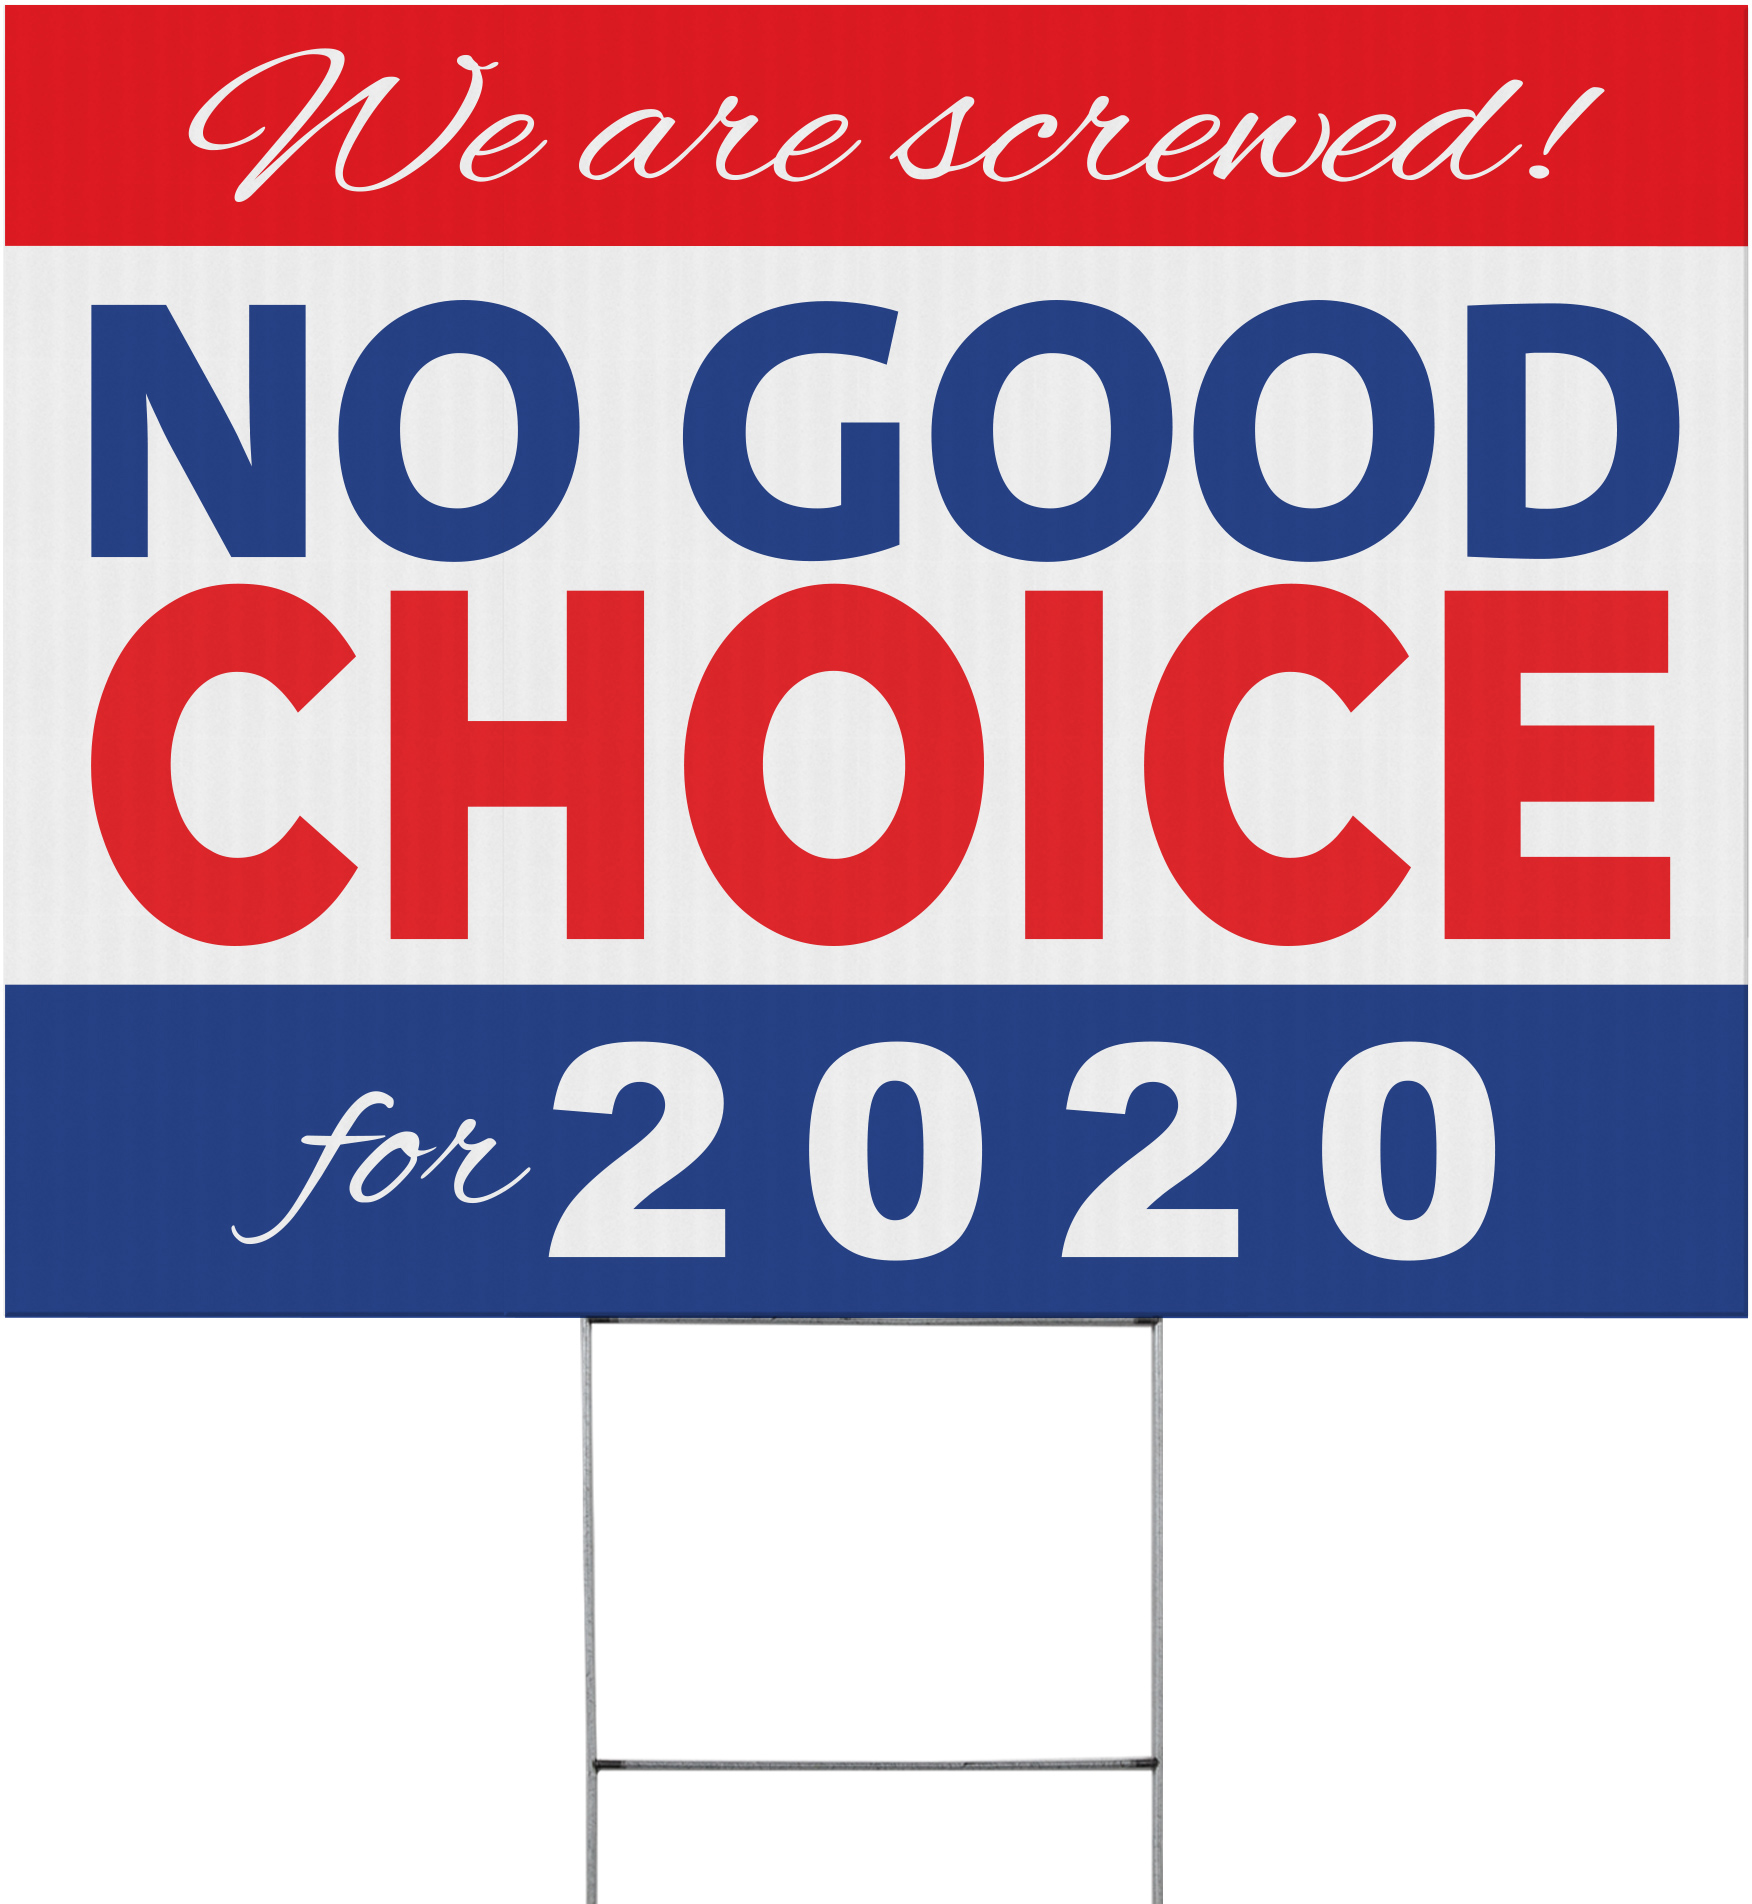 No Good Choice for 2020 - We Are Screwed Political Yard Sign - 24 x 18 inch